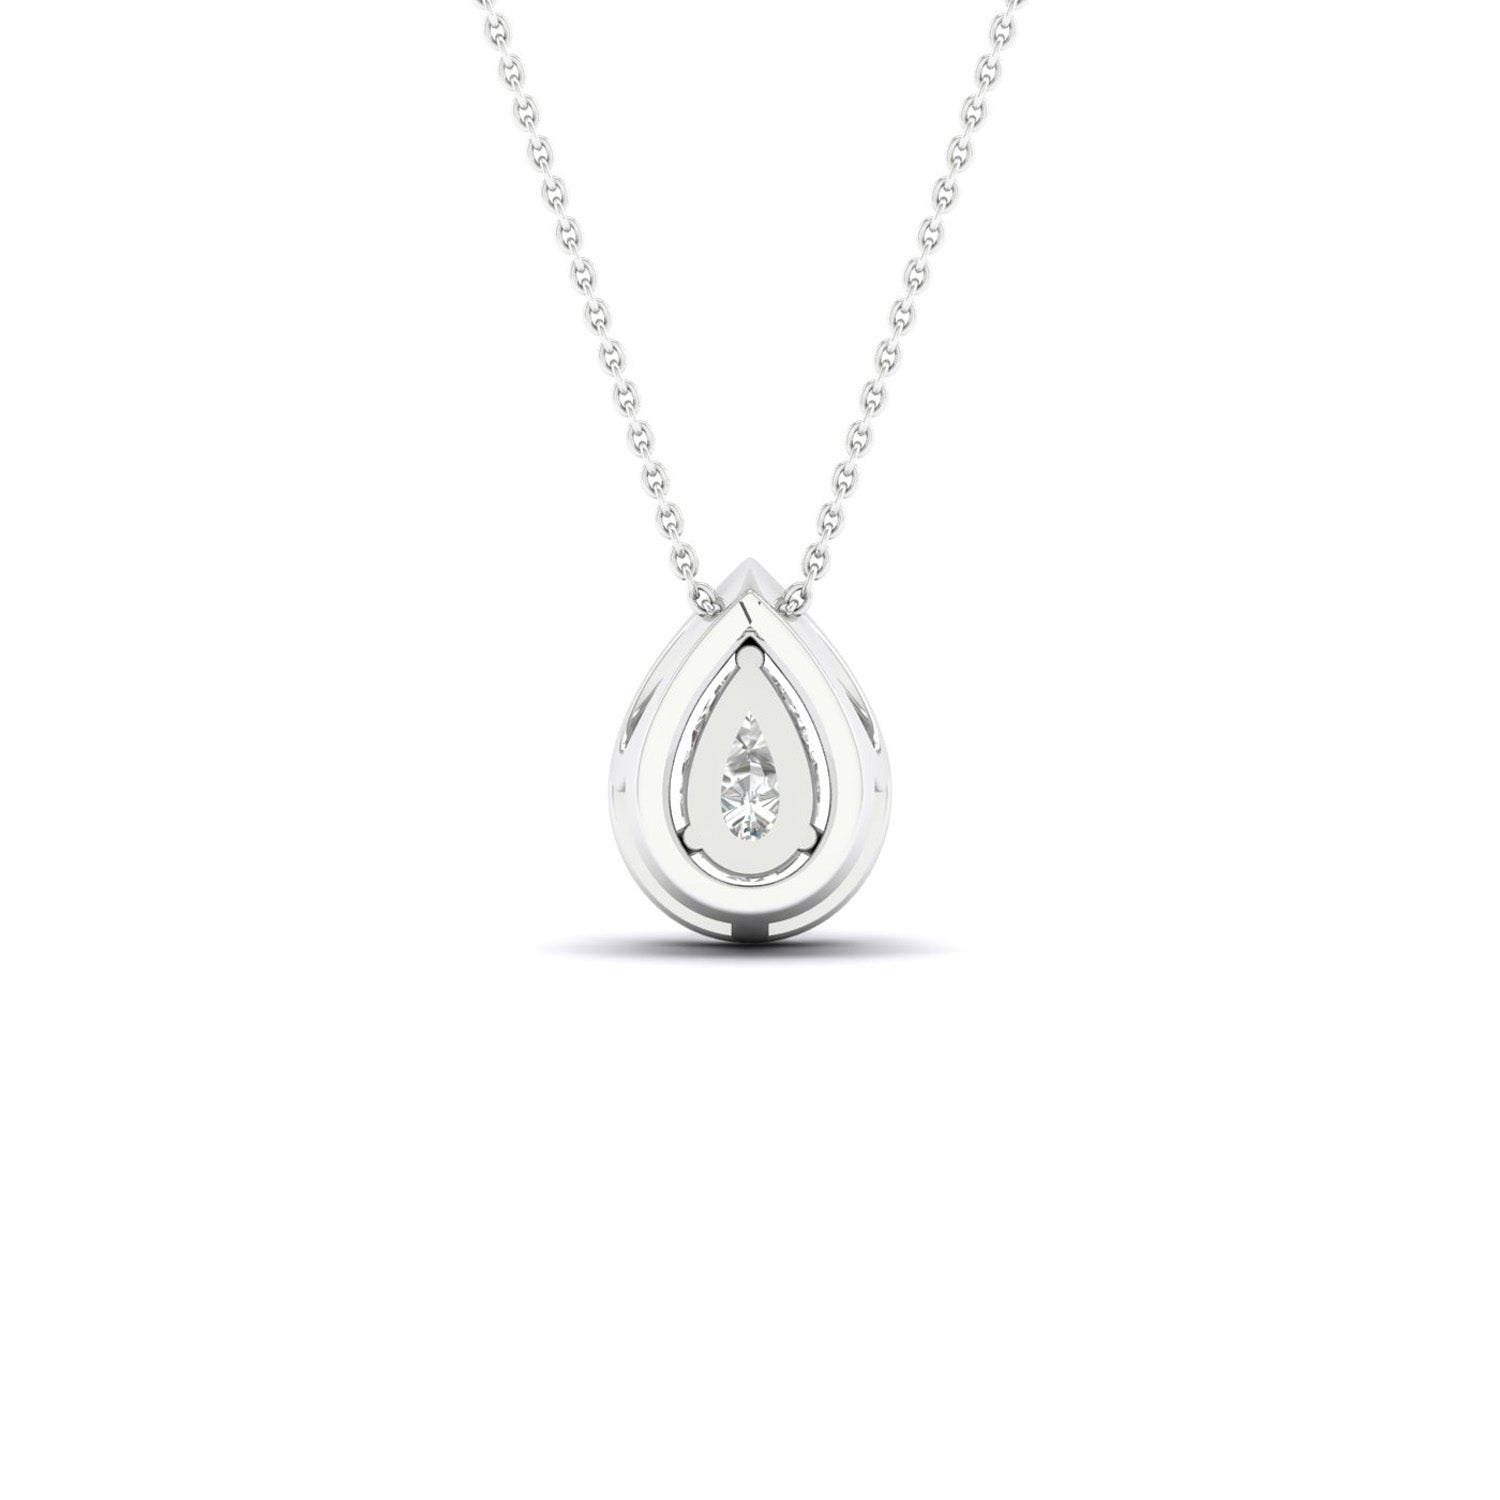 Petite Dewdrop Halo Necklace_Product angle_1/6 Ct. - 3